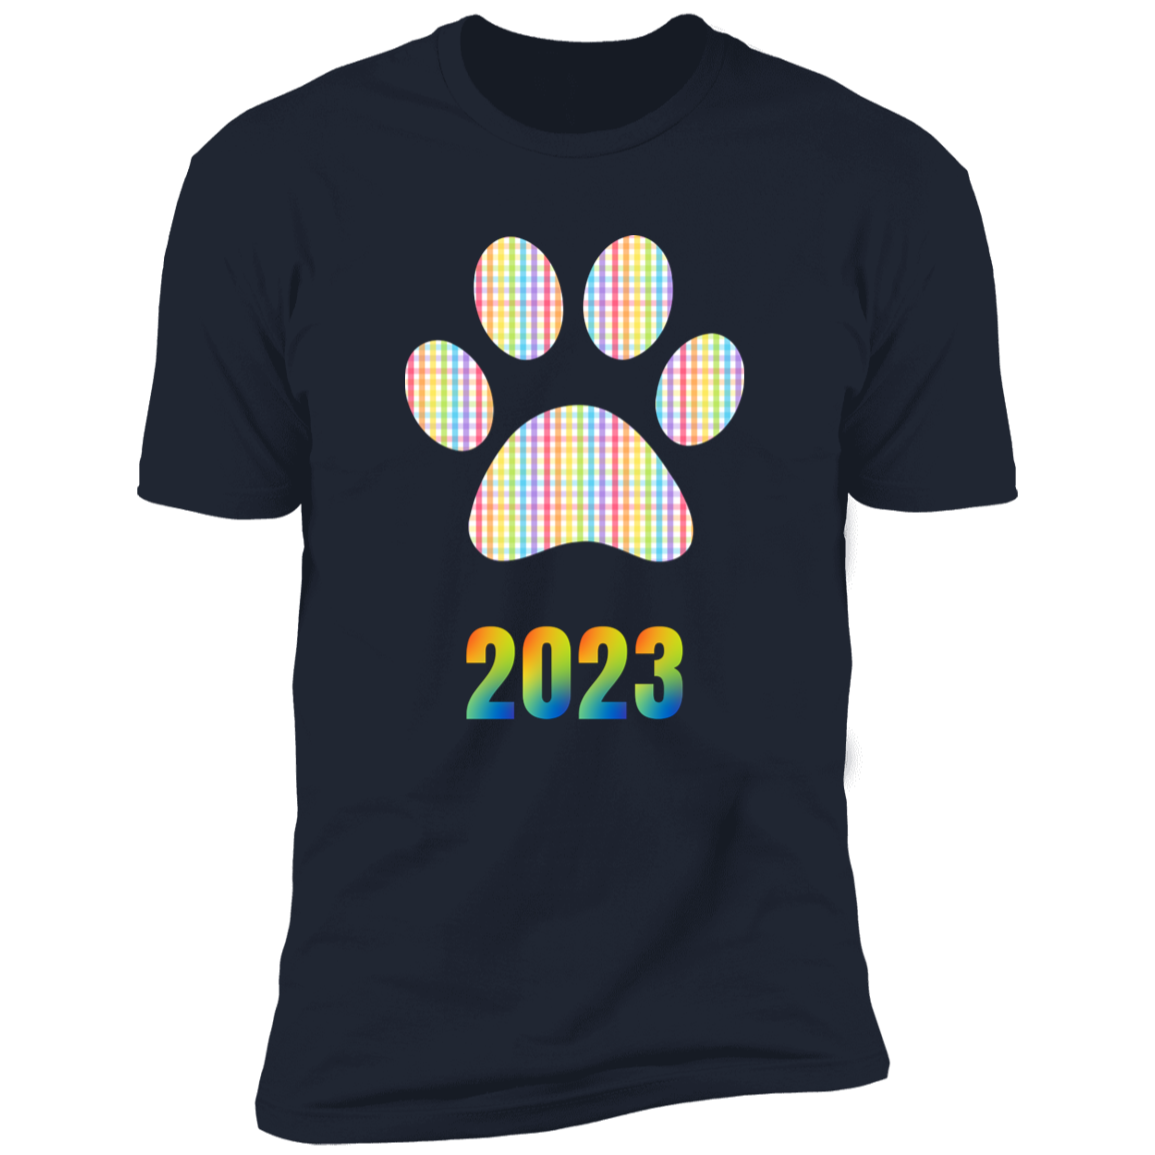 Pride Paw 2023 (Gingham) Pride T-shirt, Paw Pride Dog Shirt for humans, in navy blue